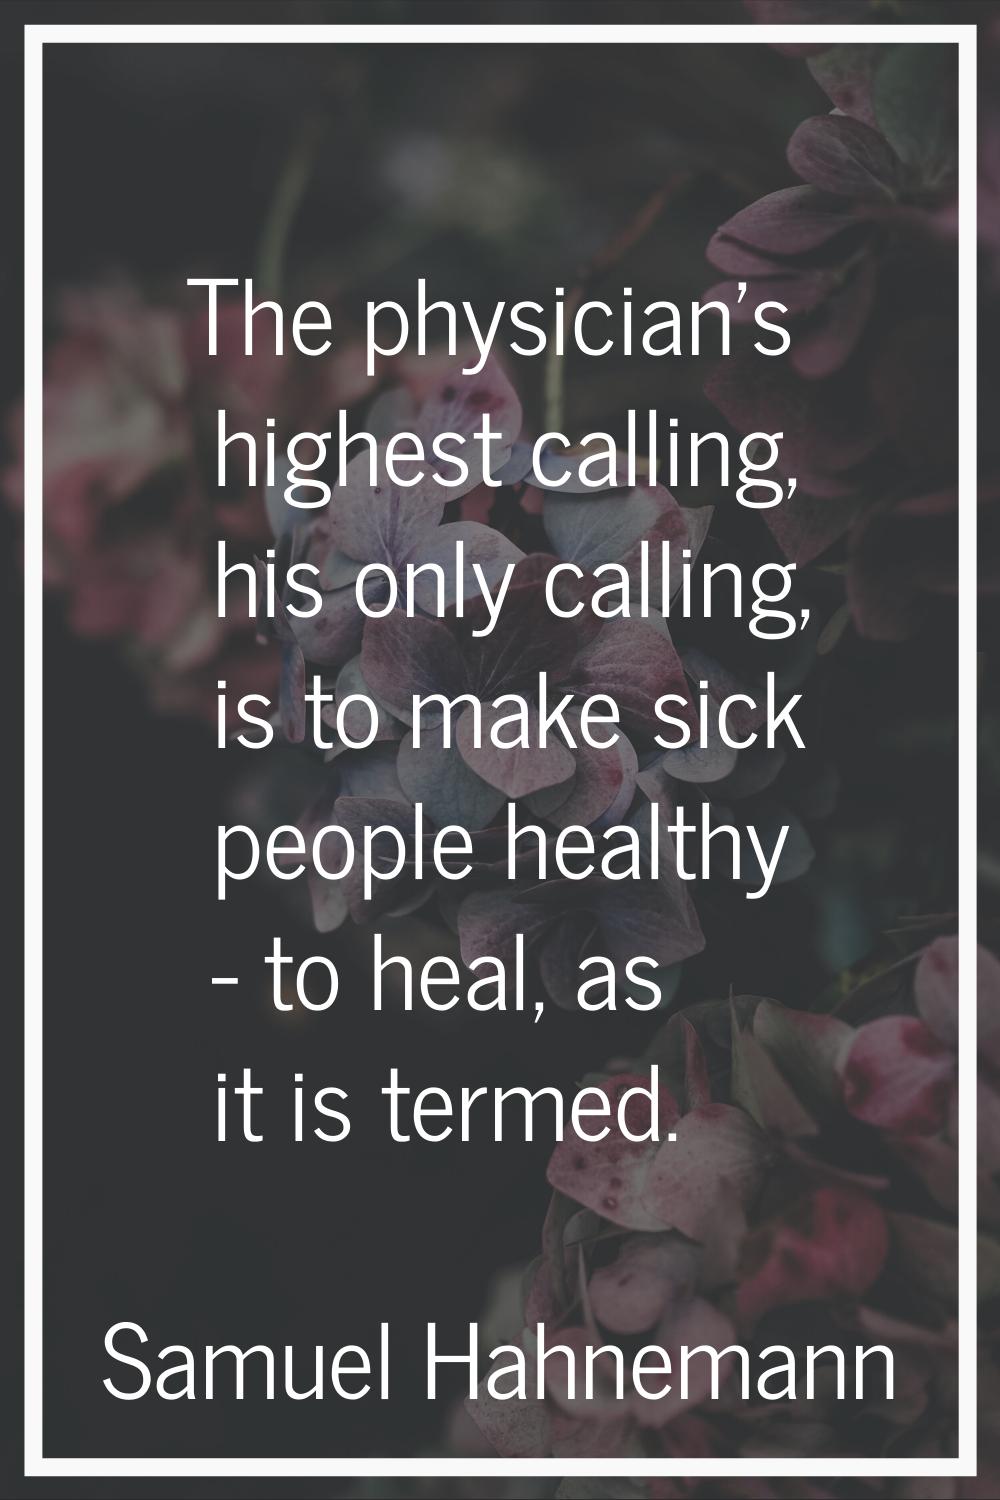 The physician's highest calling, his only calling, is to make sick people healthy - to heal, as it 